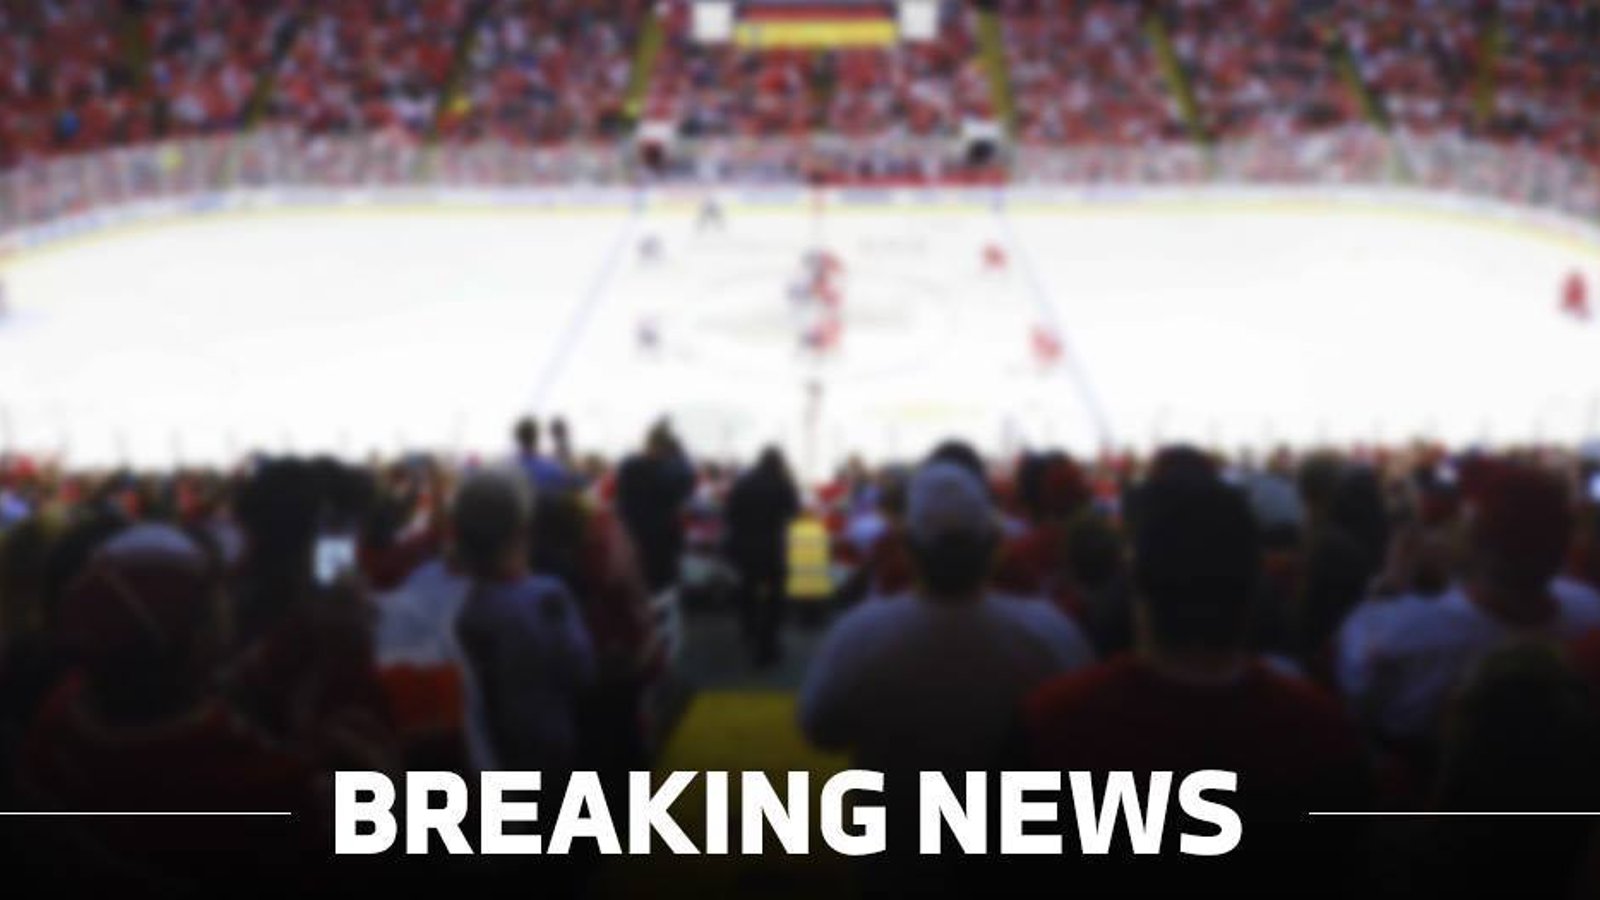 Breaking: NHL fan sexually assaulted at NHL playoff game.